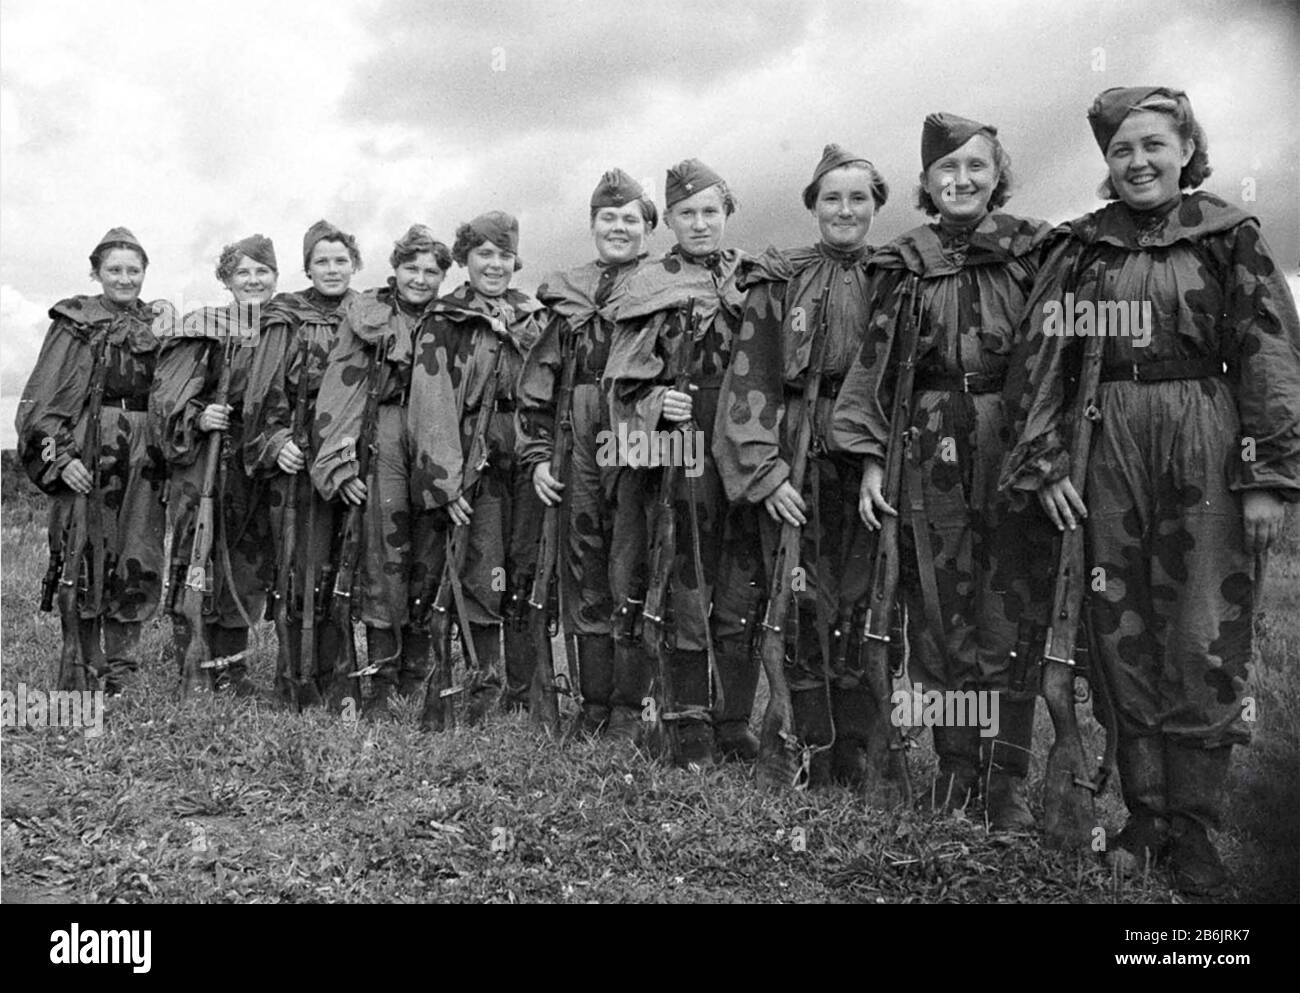 Ww2 Women High Resolution Stock Photography and Images - Alamy